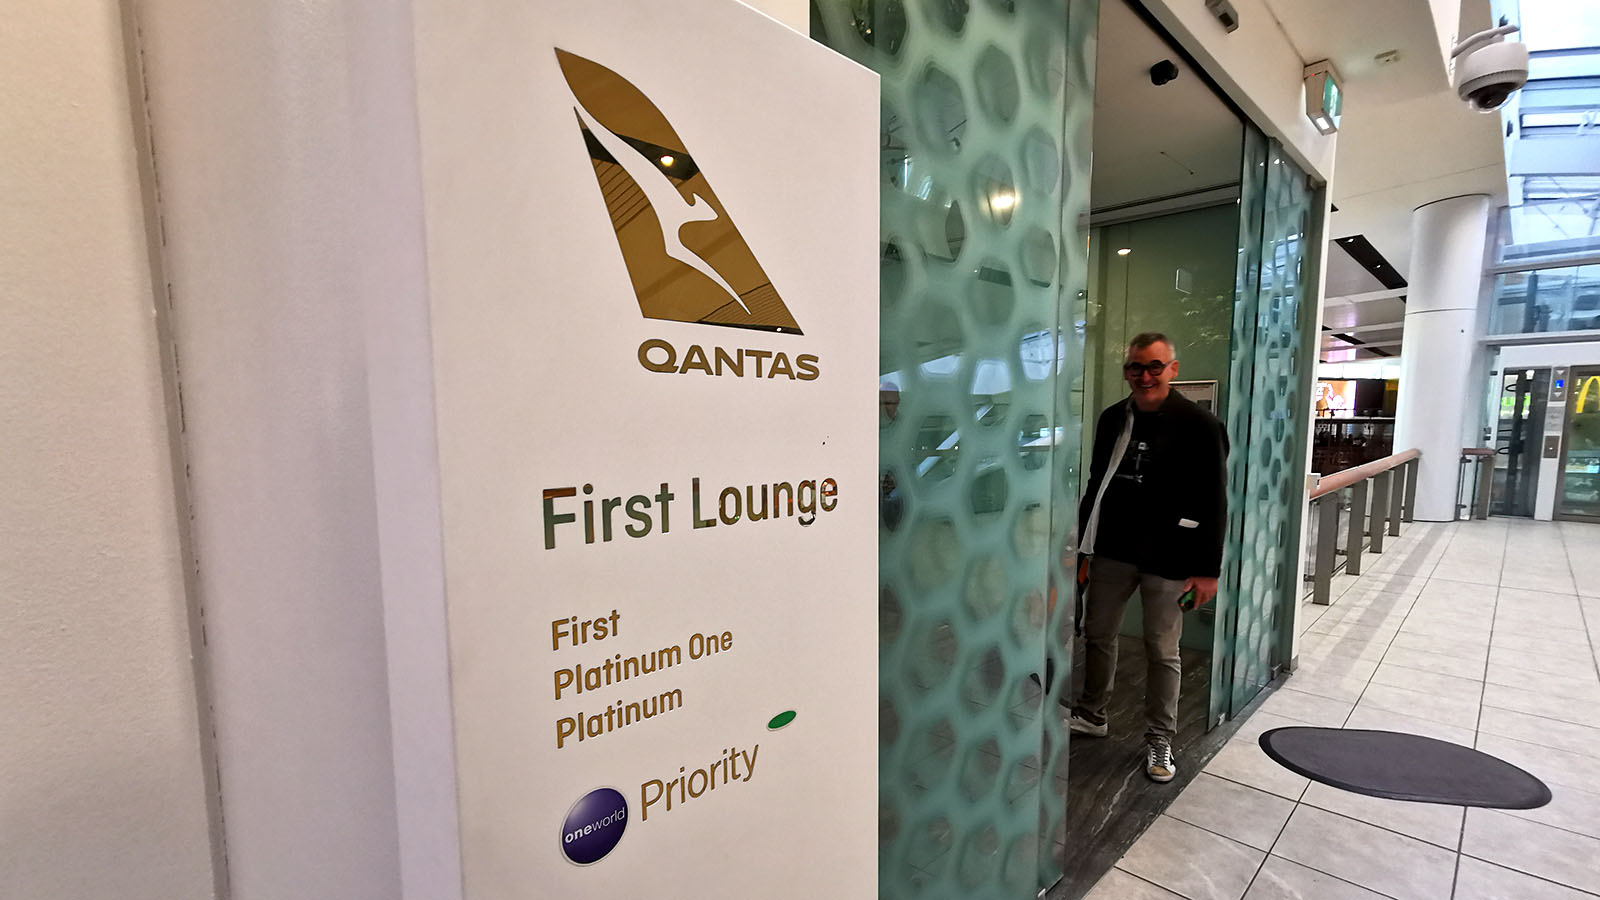 Outside Sydney's Qantas First Lounge